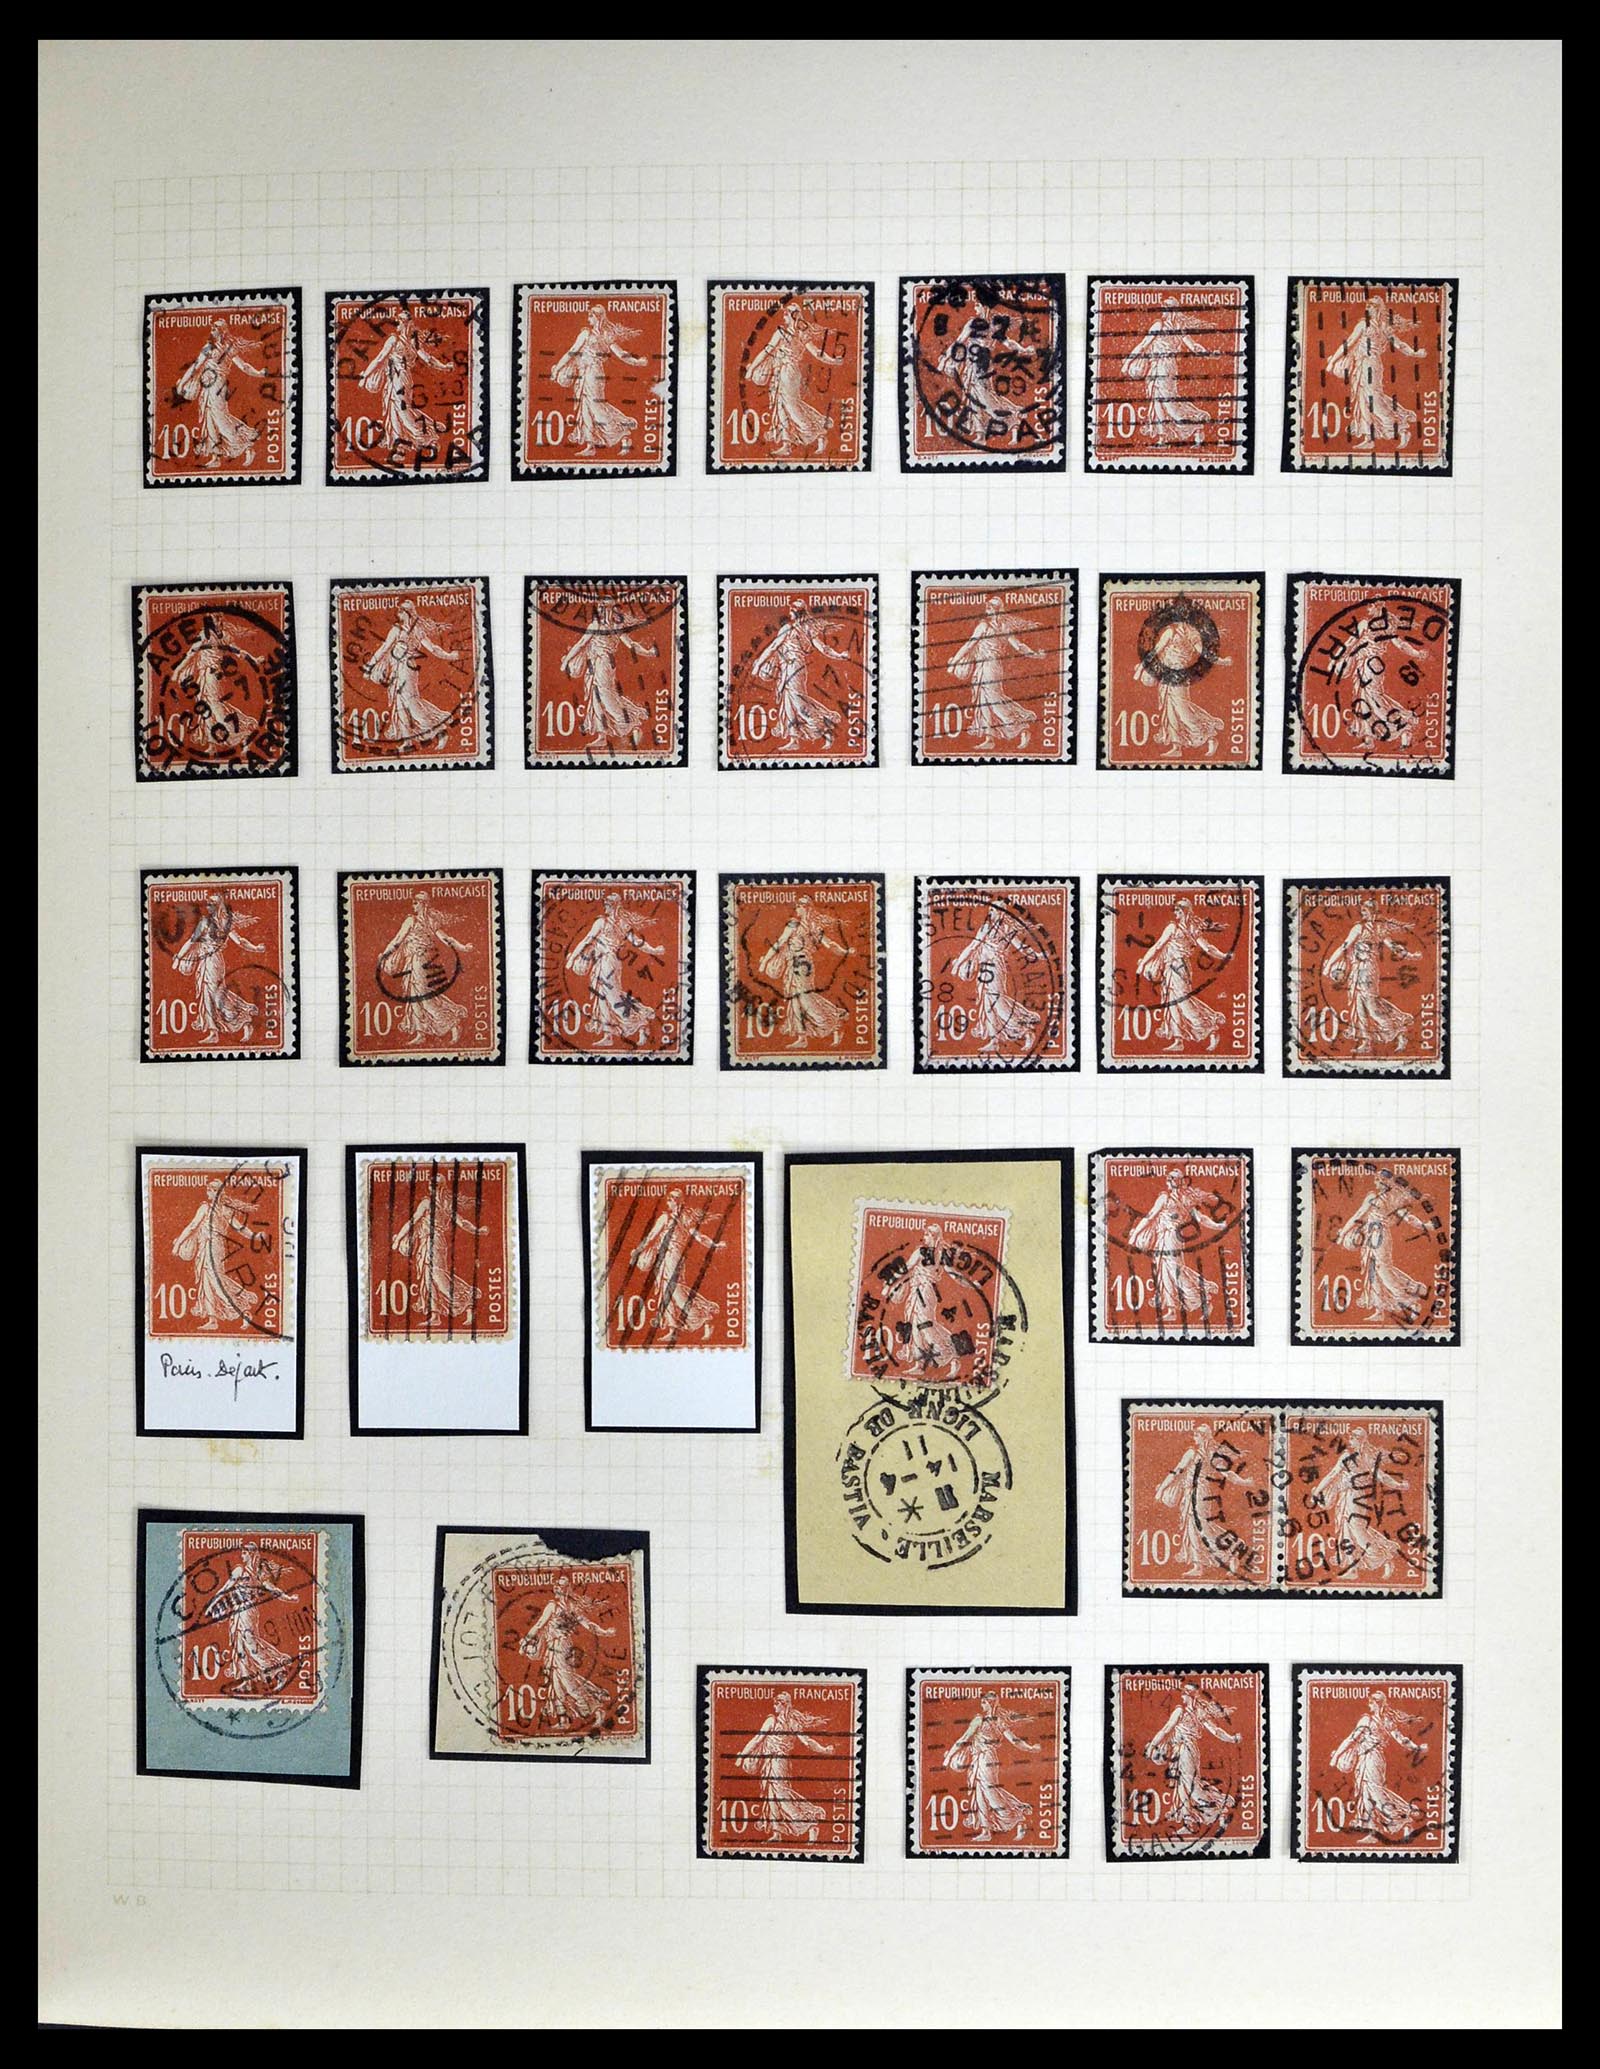 39329 0040 - Stamp collection 39329 France Semeuse.